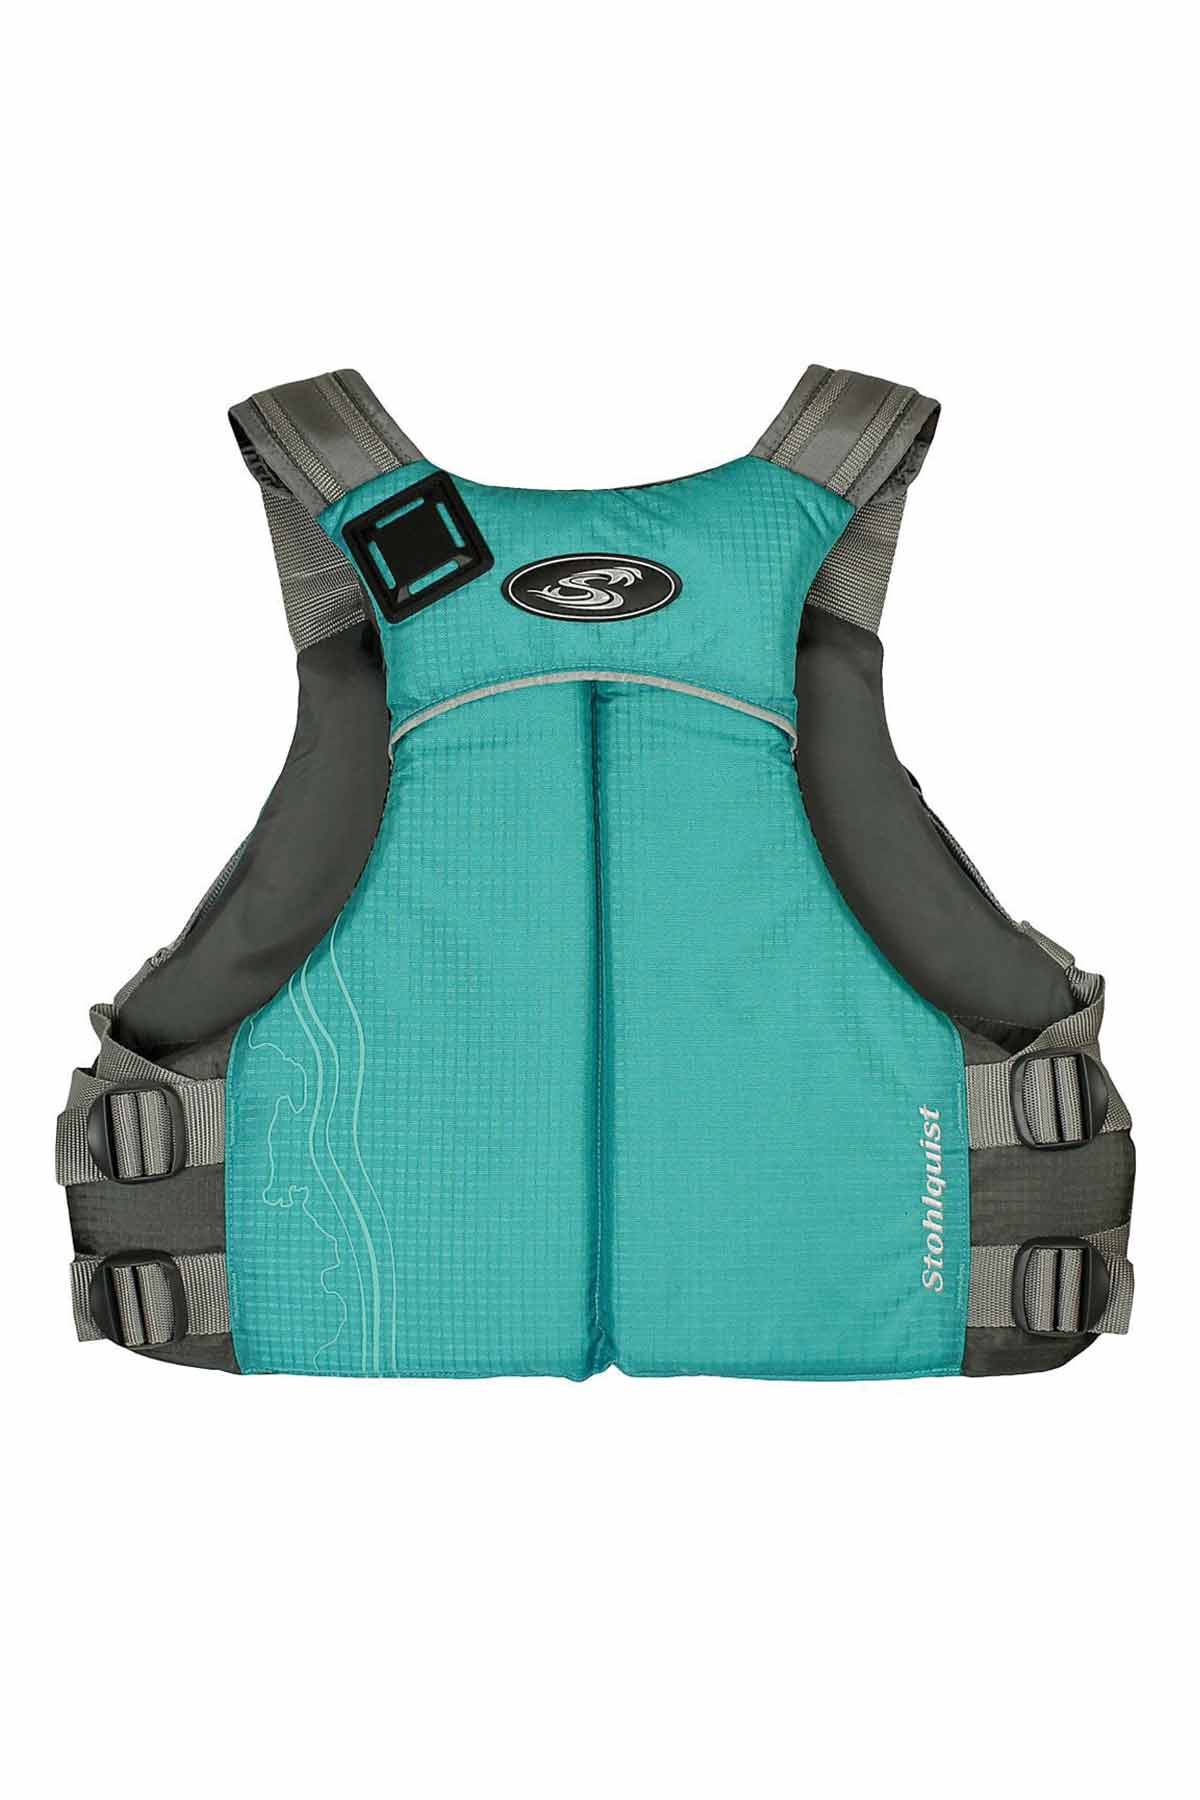 Stohlquist Women's Glide PFD Turquoise Back